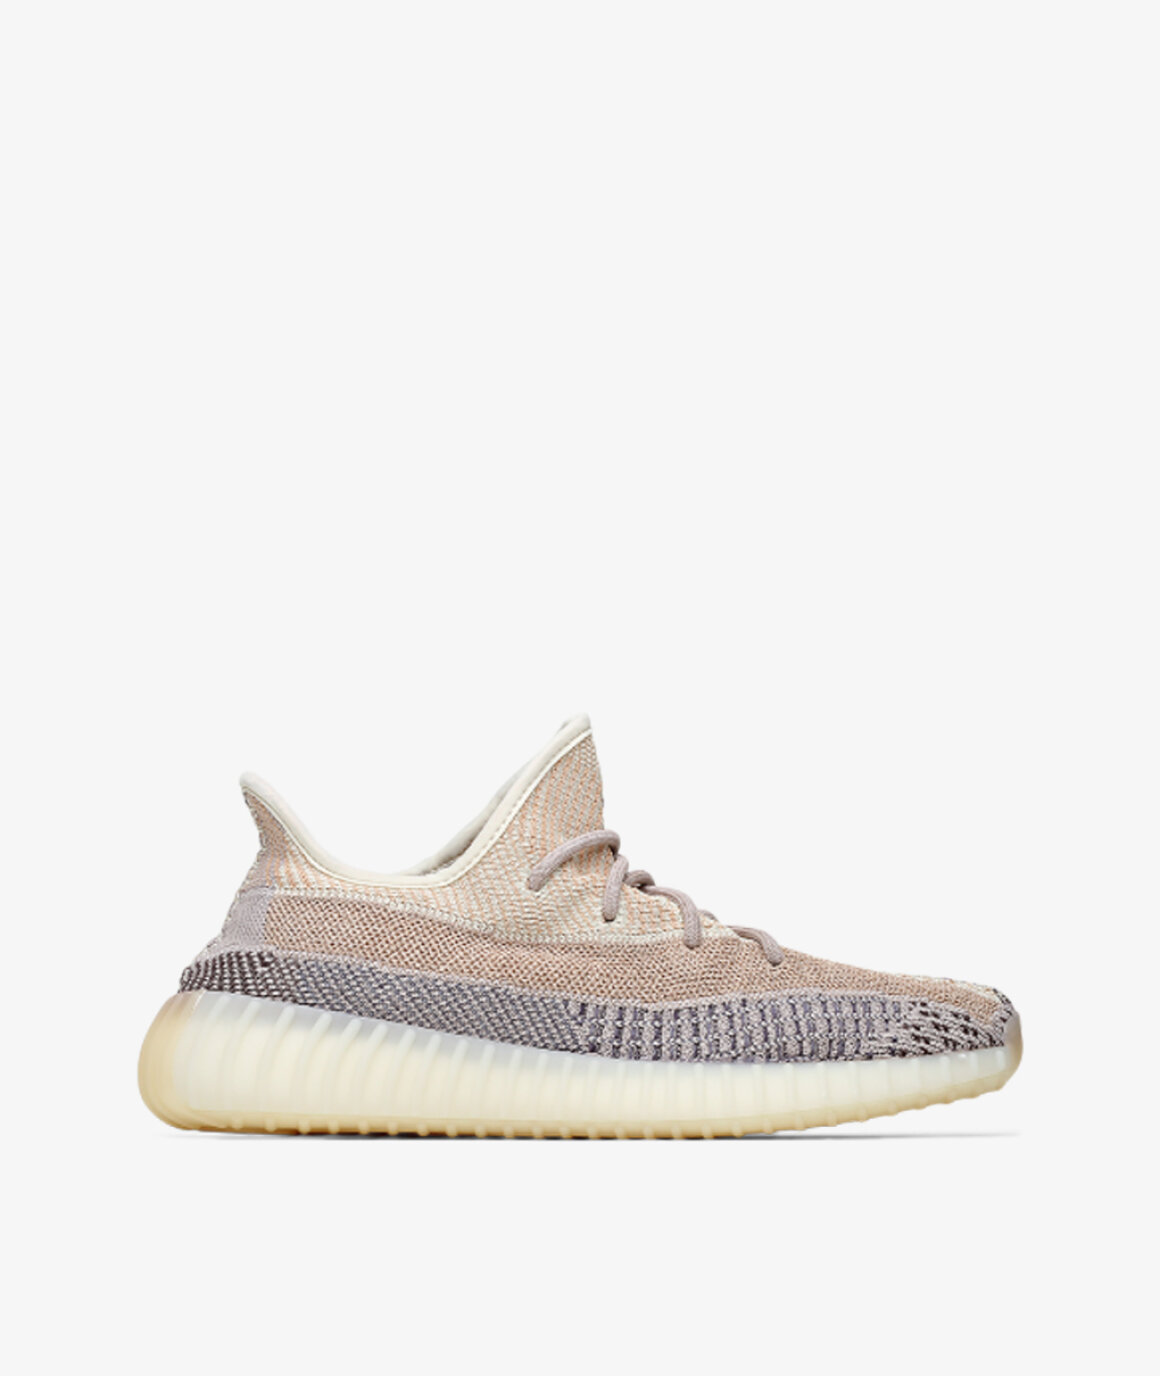 Norse Store | Shipping Worldwide - Yeezy Boost 350 V2 (Ash Pearl)